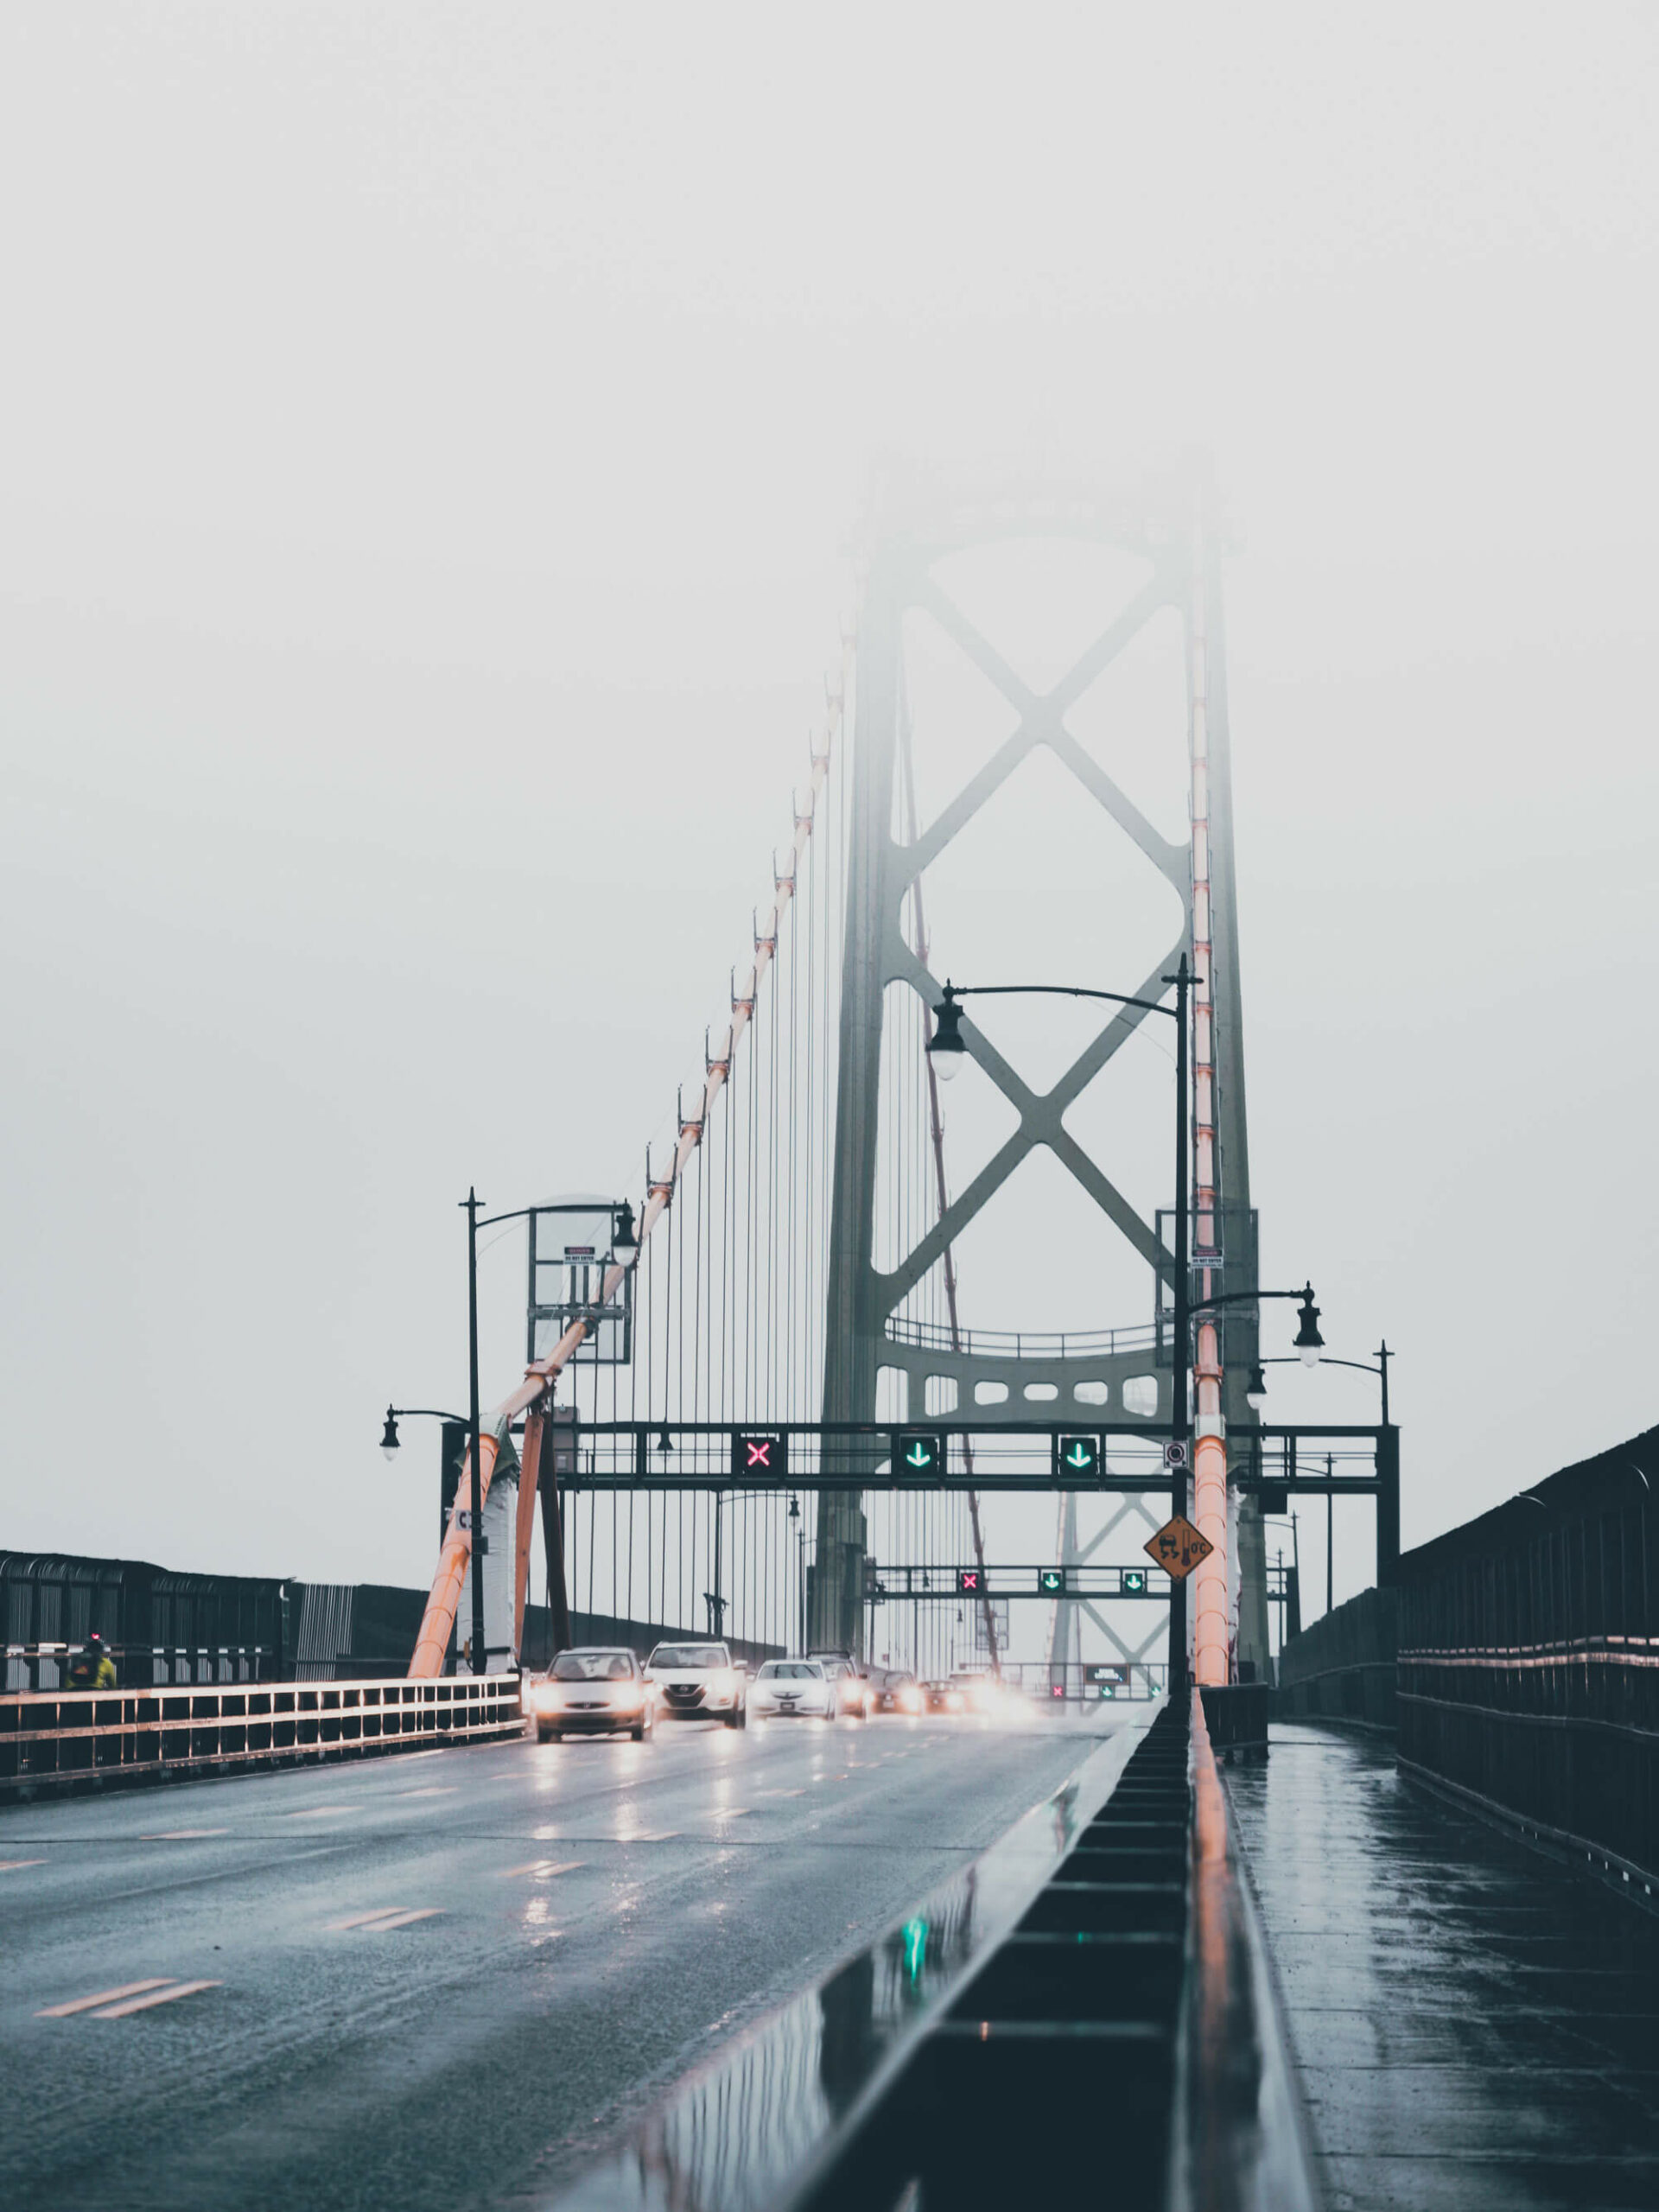 Street view of multiple incoming cars on the Macdonald Bridge that is partly covered by the fog.